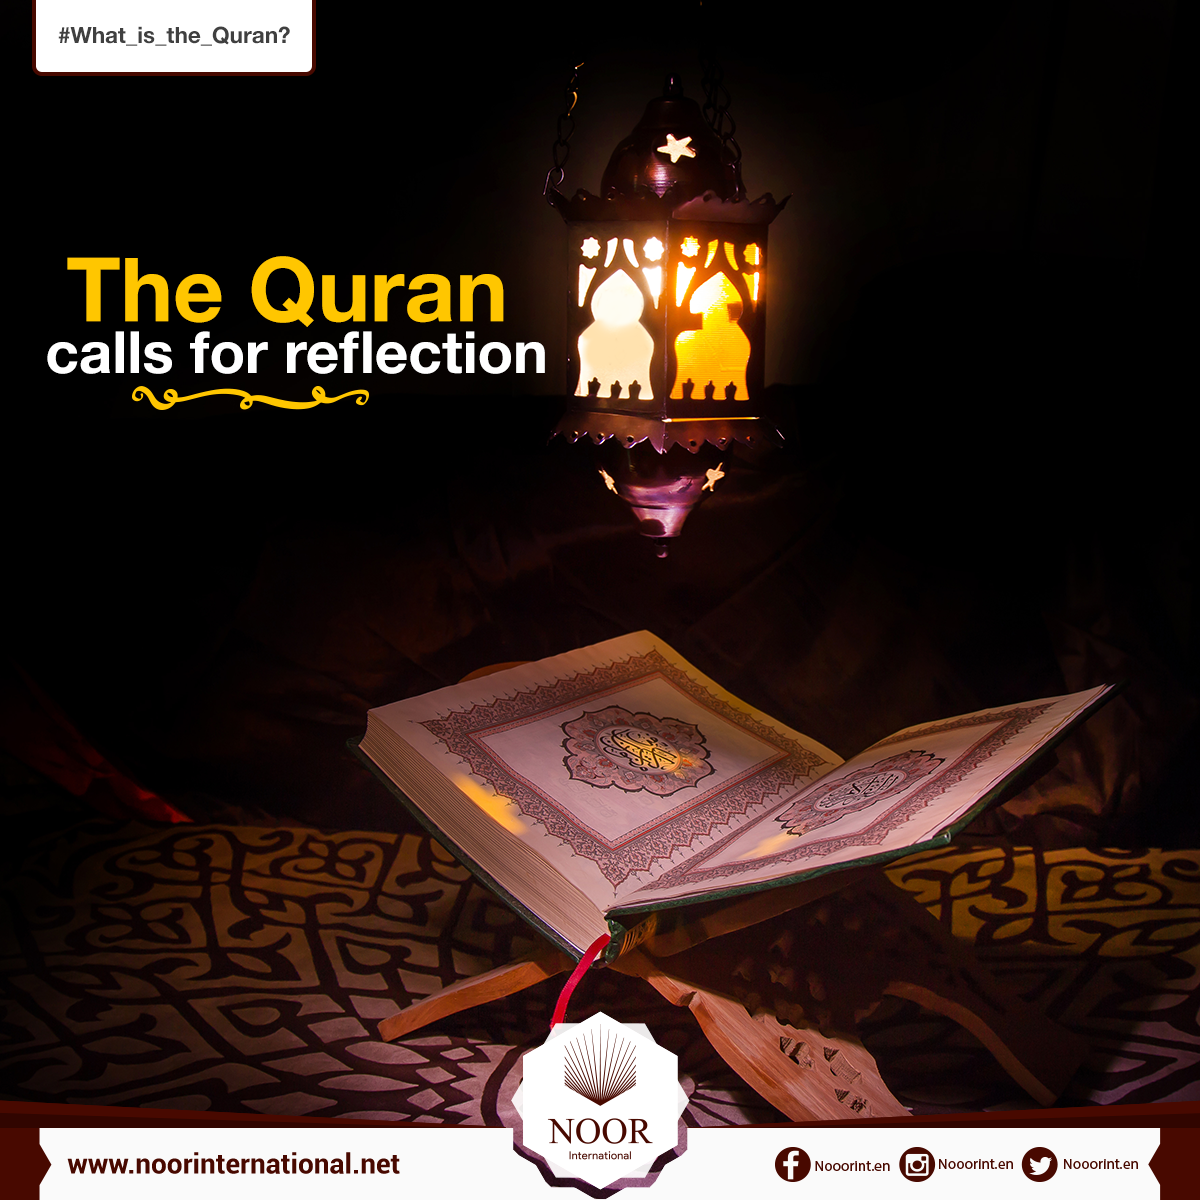 The Quran calls for reflection